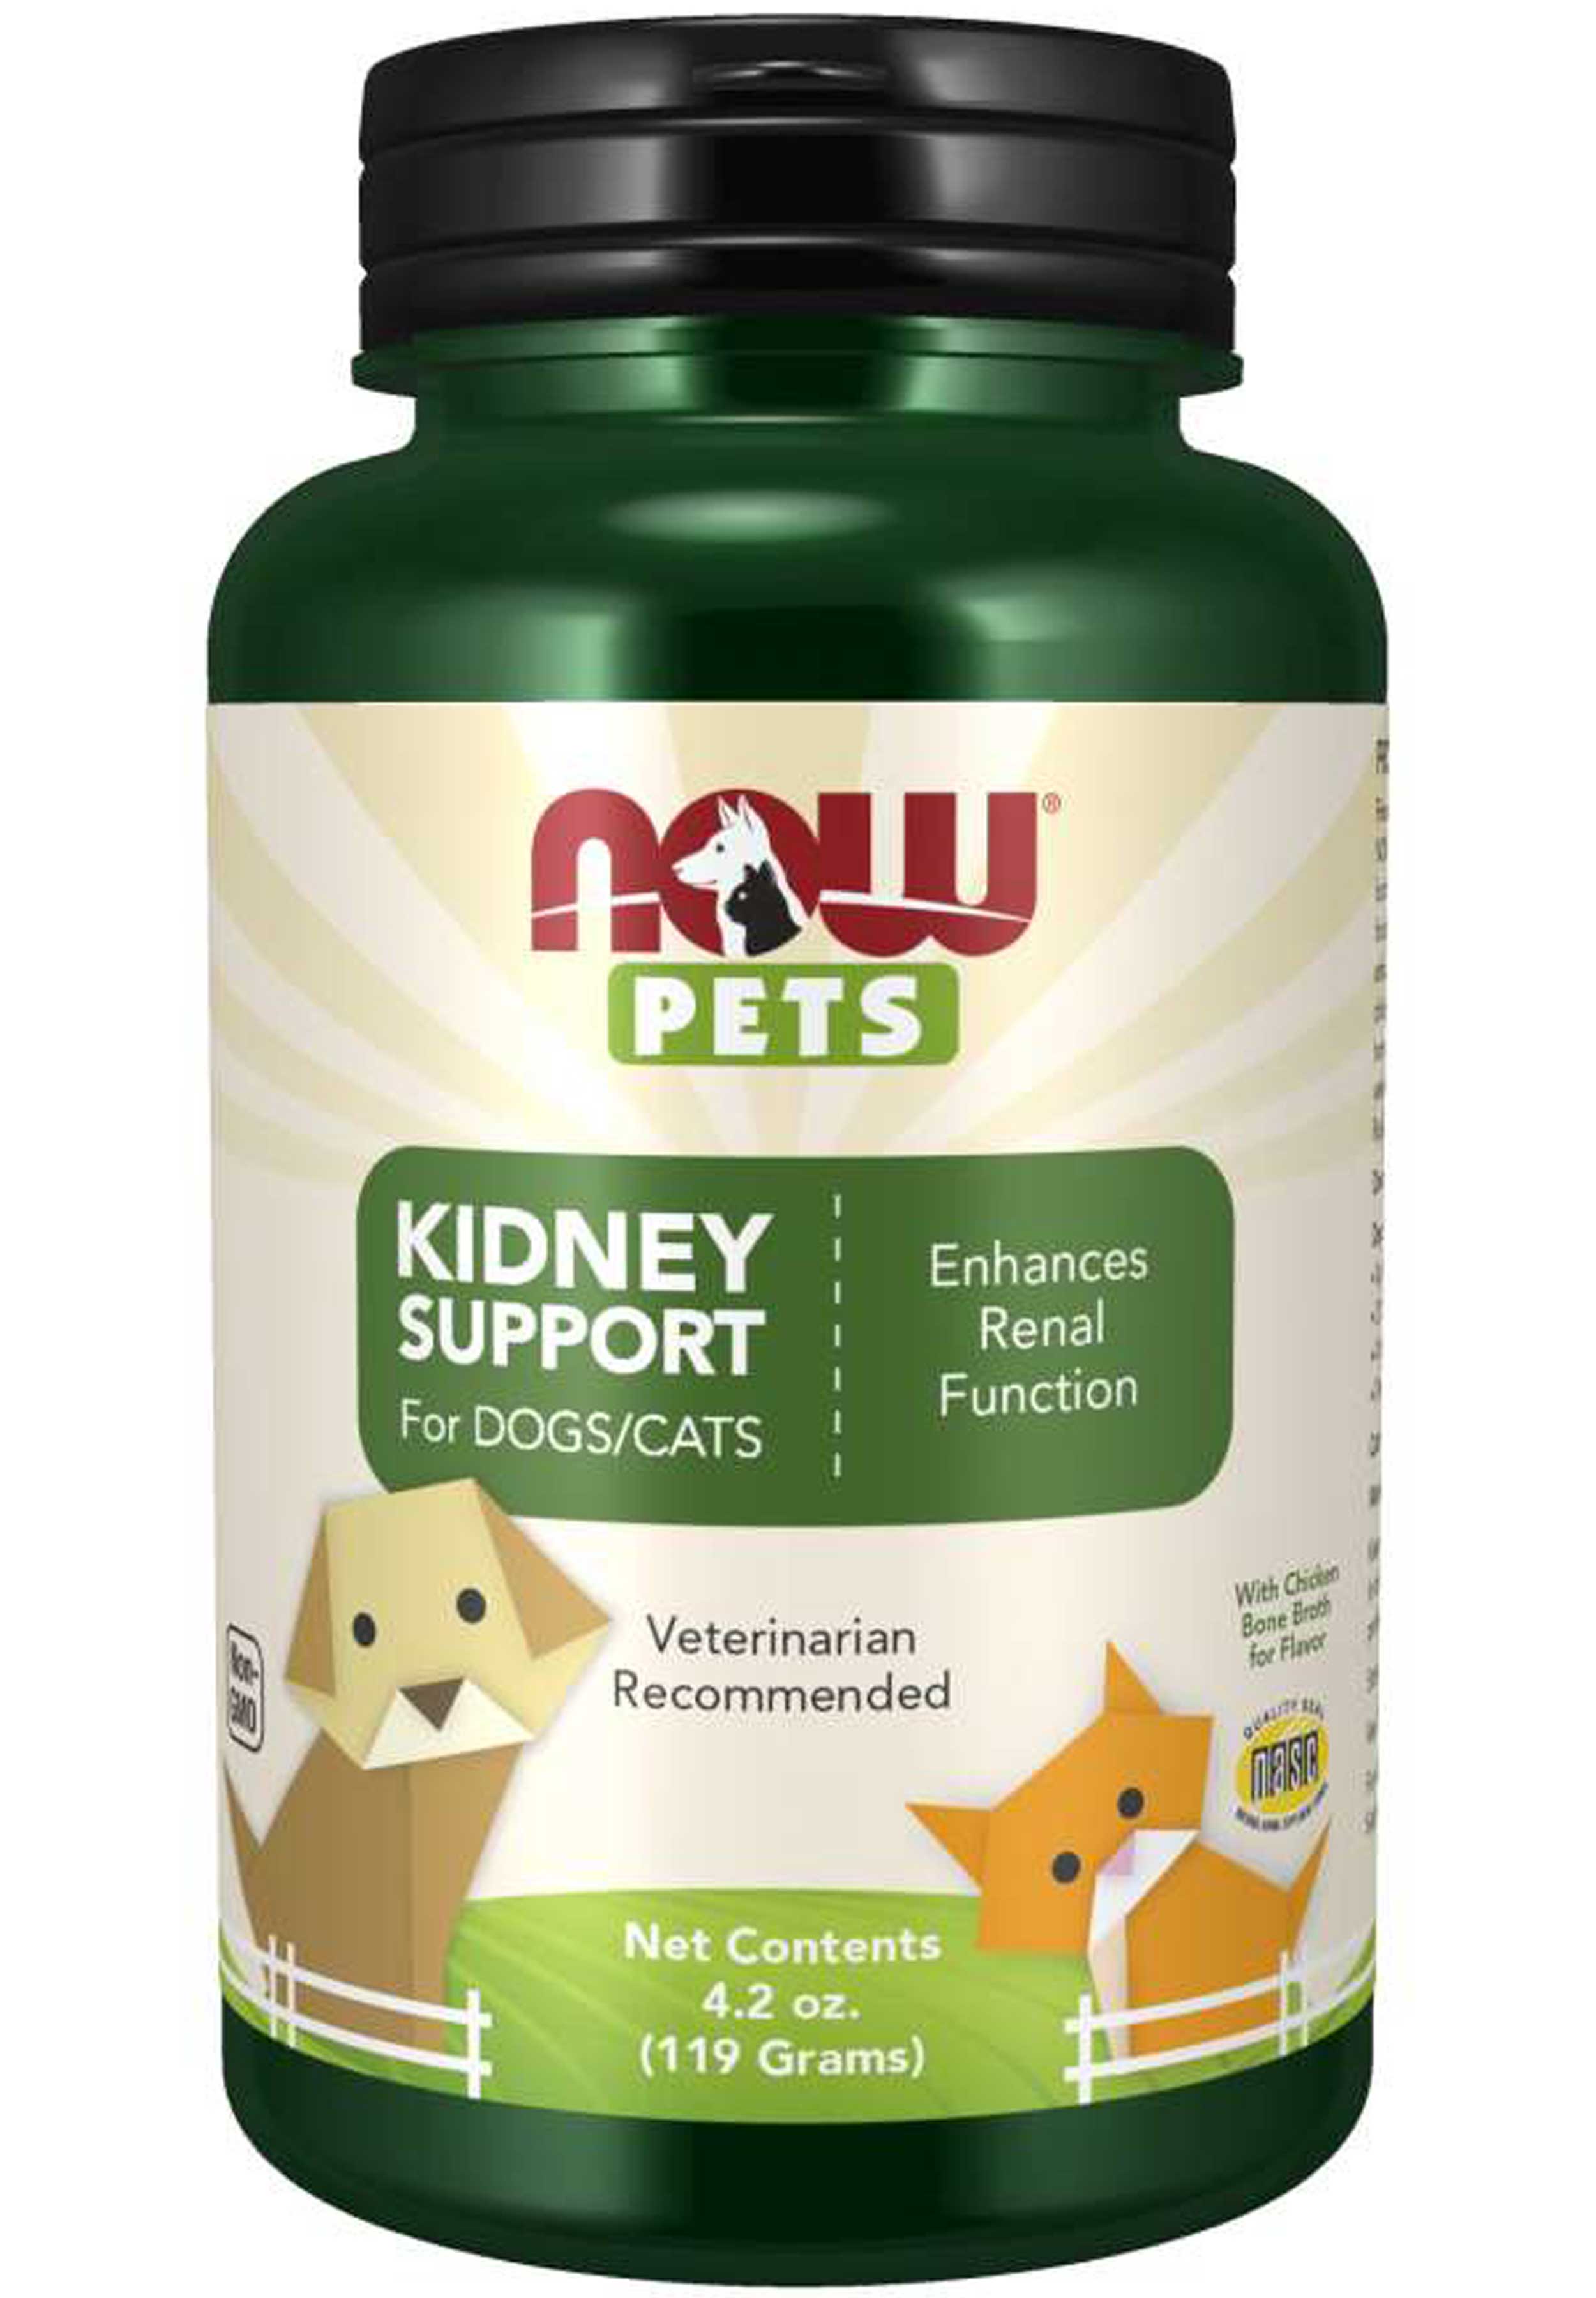 NOW Pets Kidney Support for Dogs/Cats